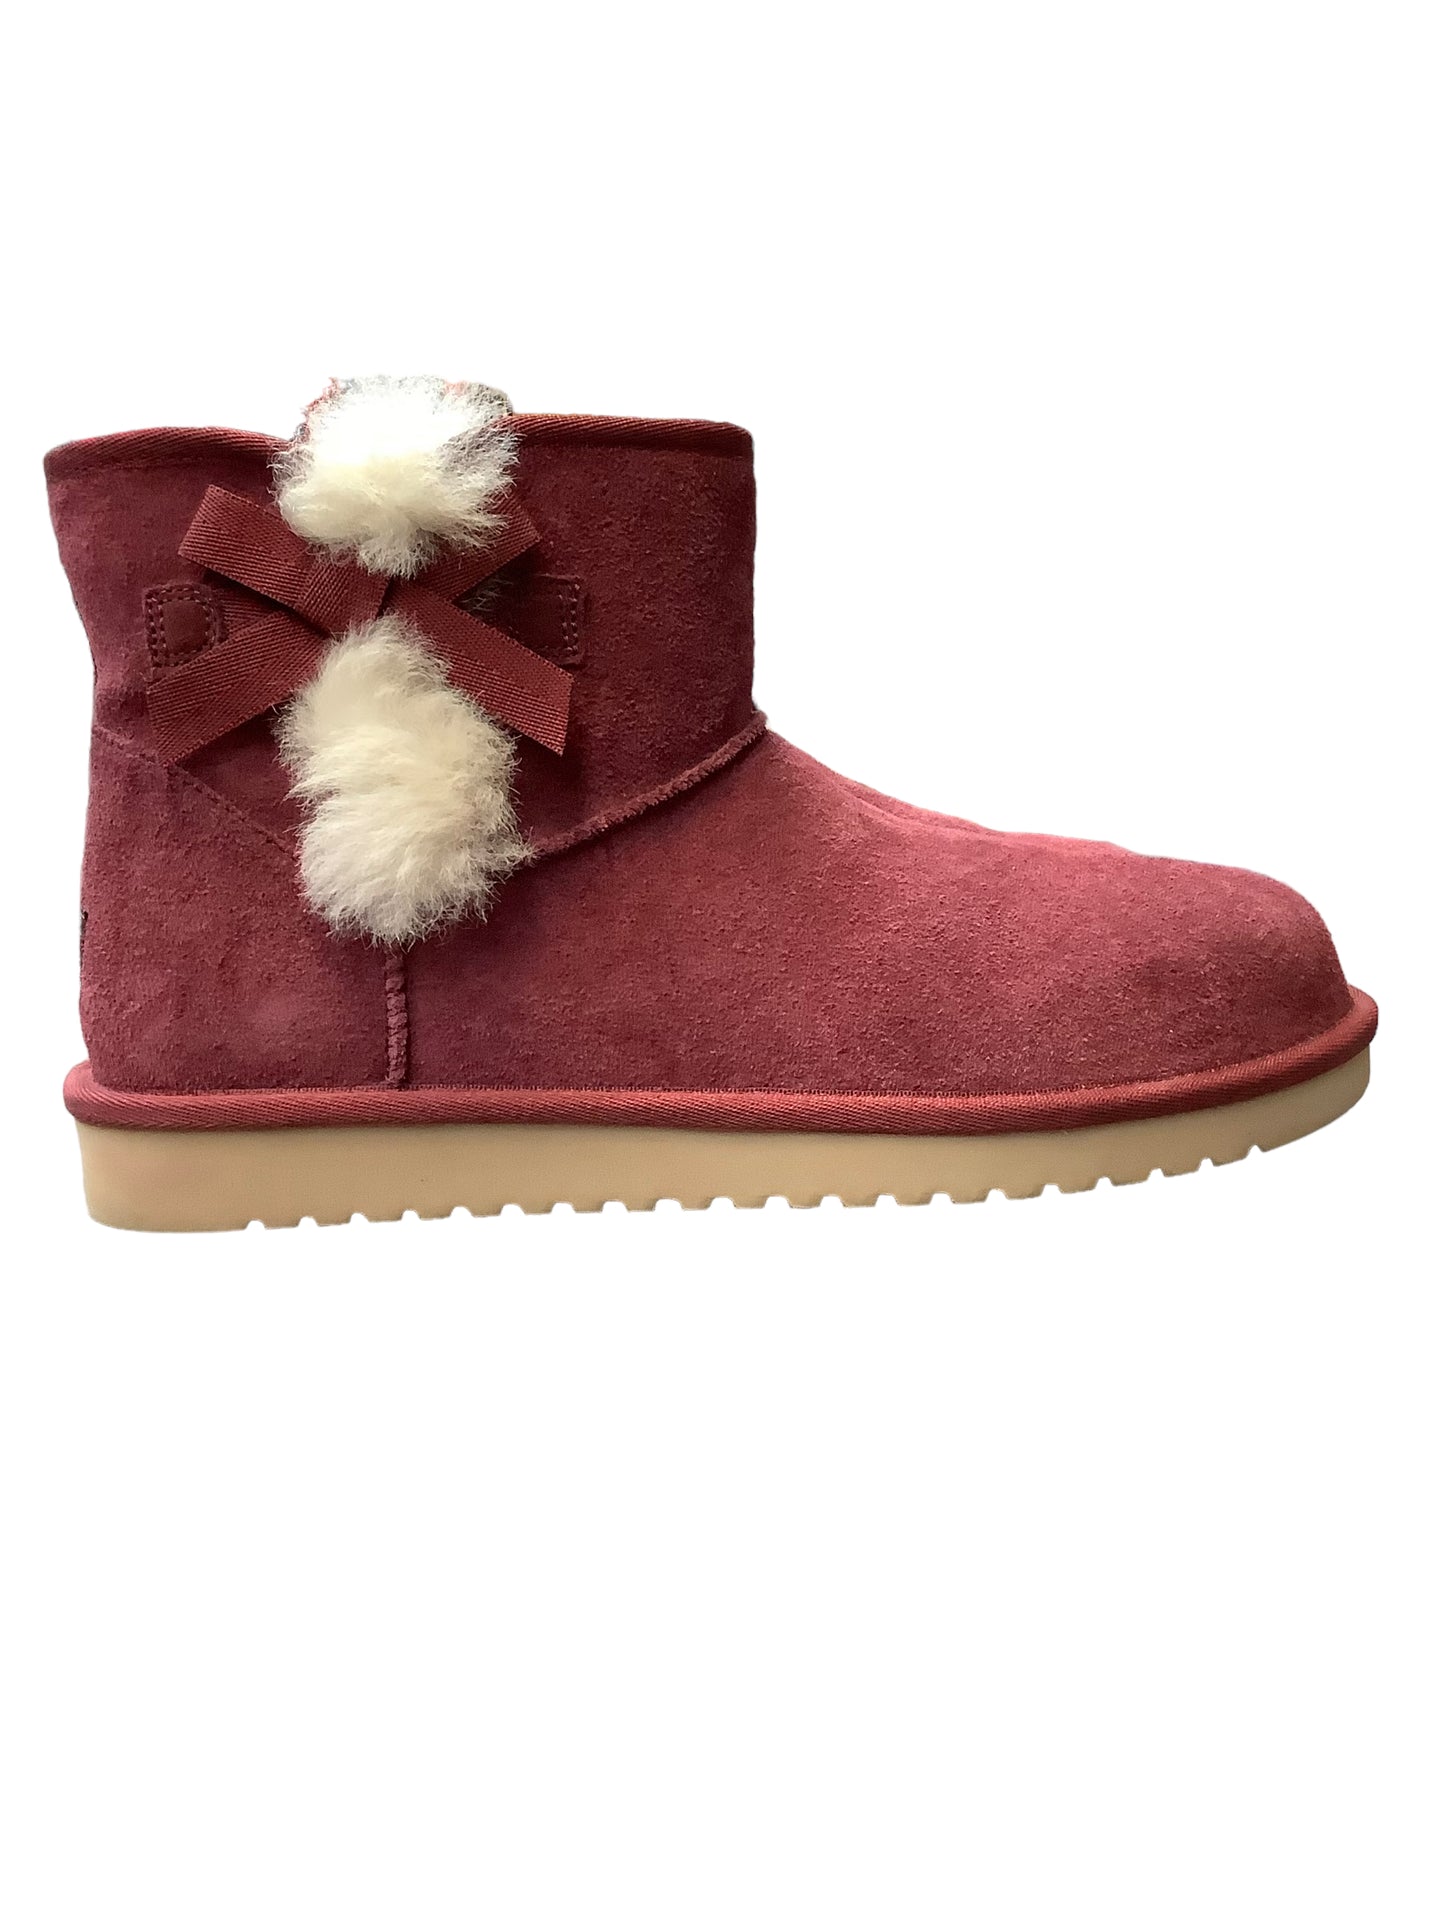 Boots Snow By Koolaburra By Ugg  Size: 10